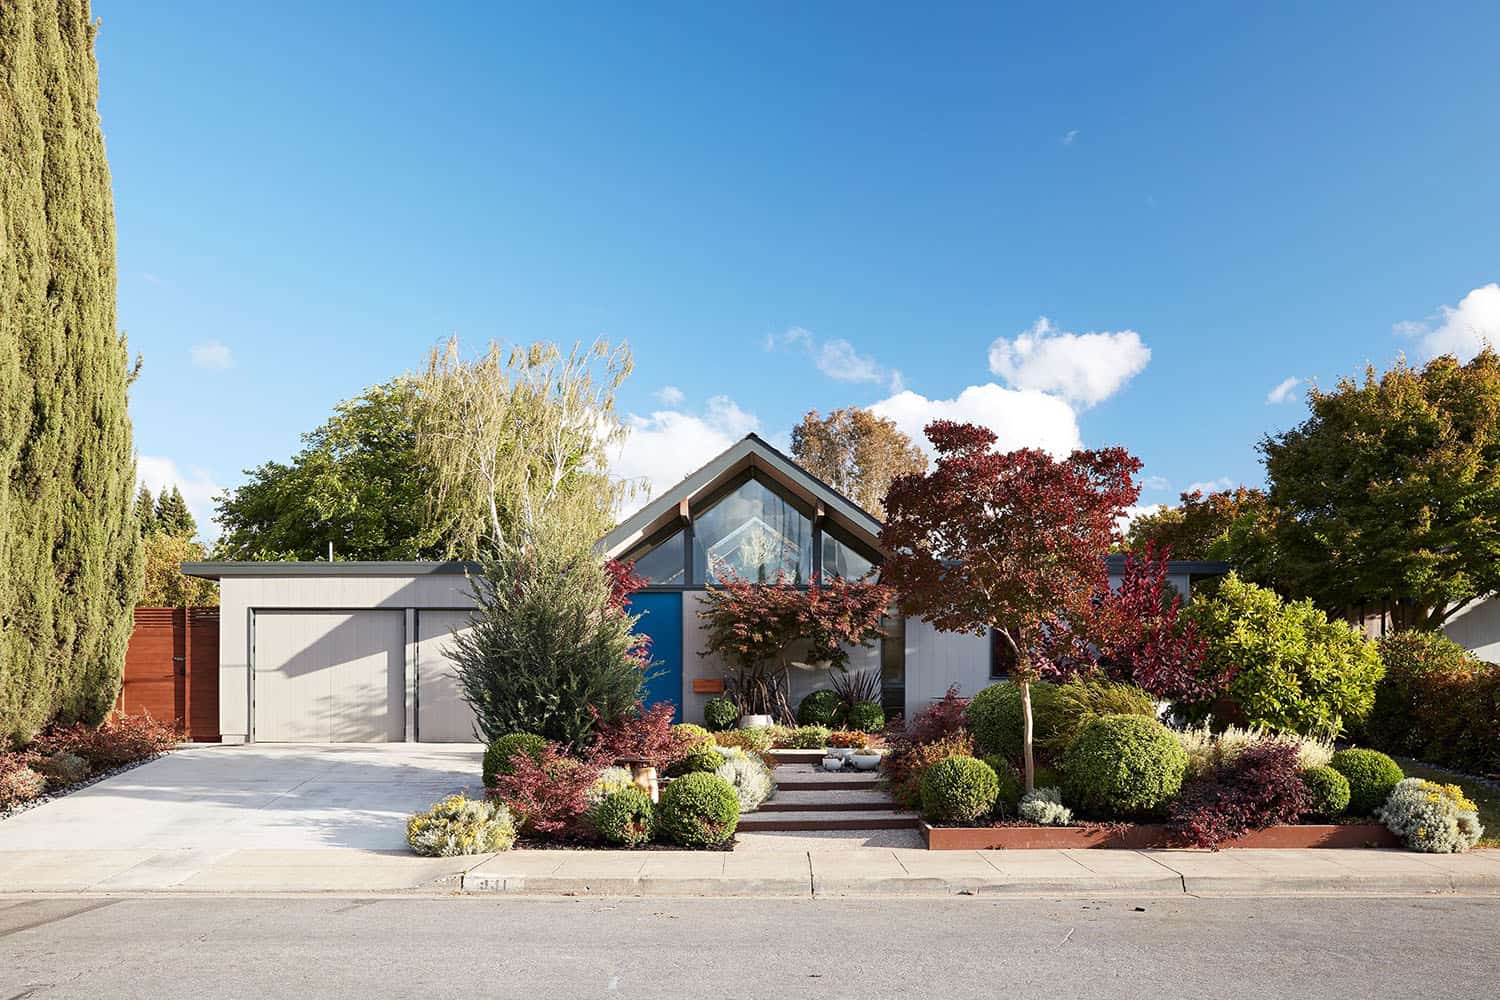 An Eichler home gets beautifully refreshed in Mountain View, California